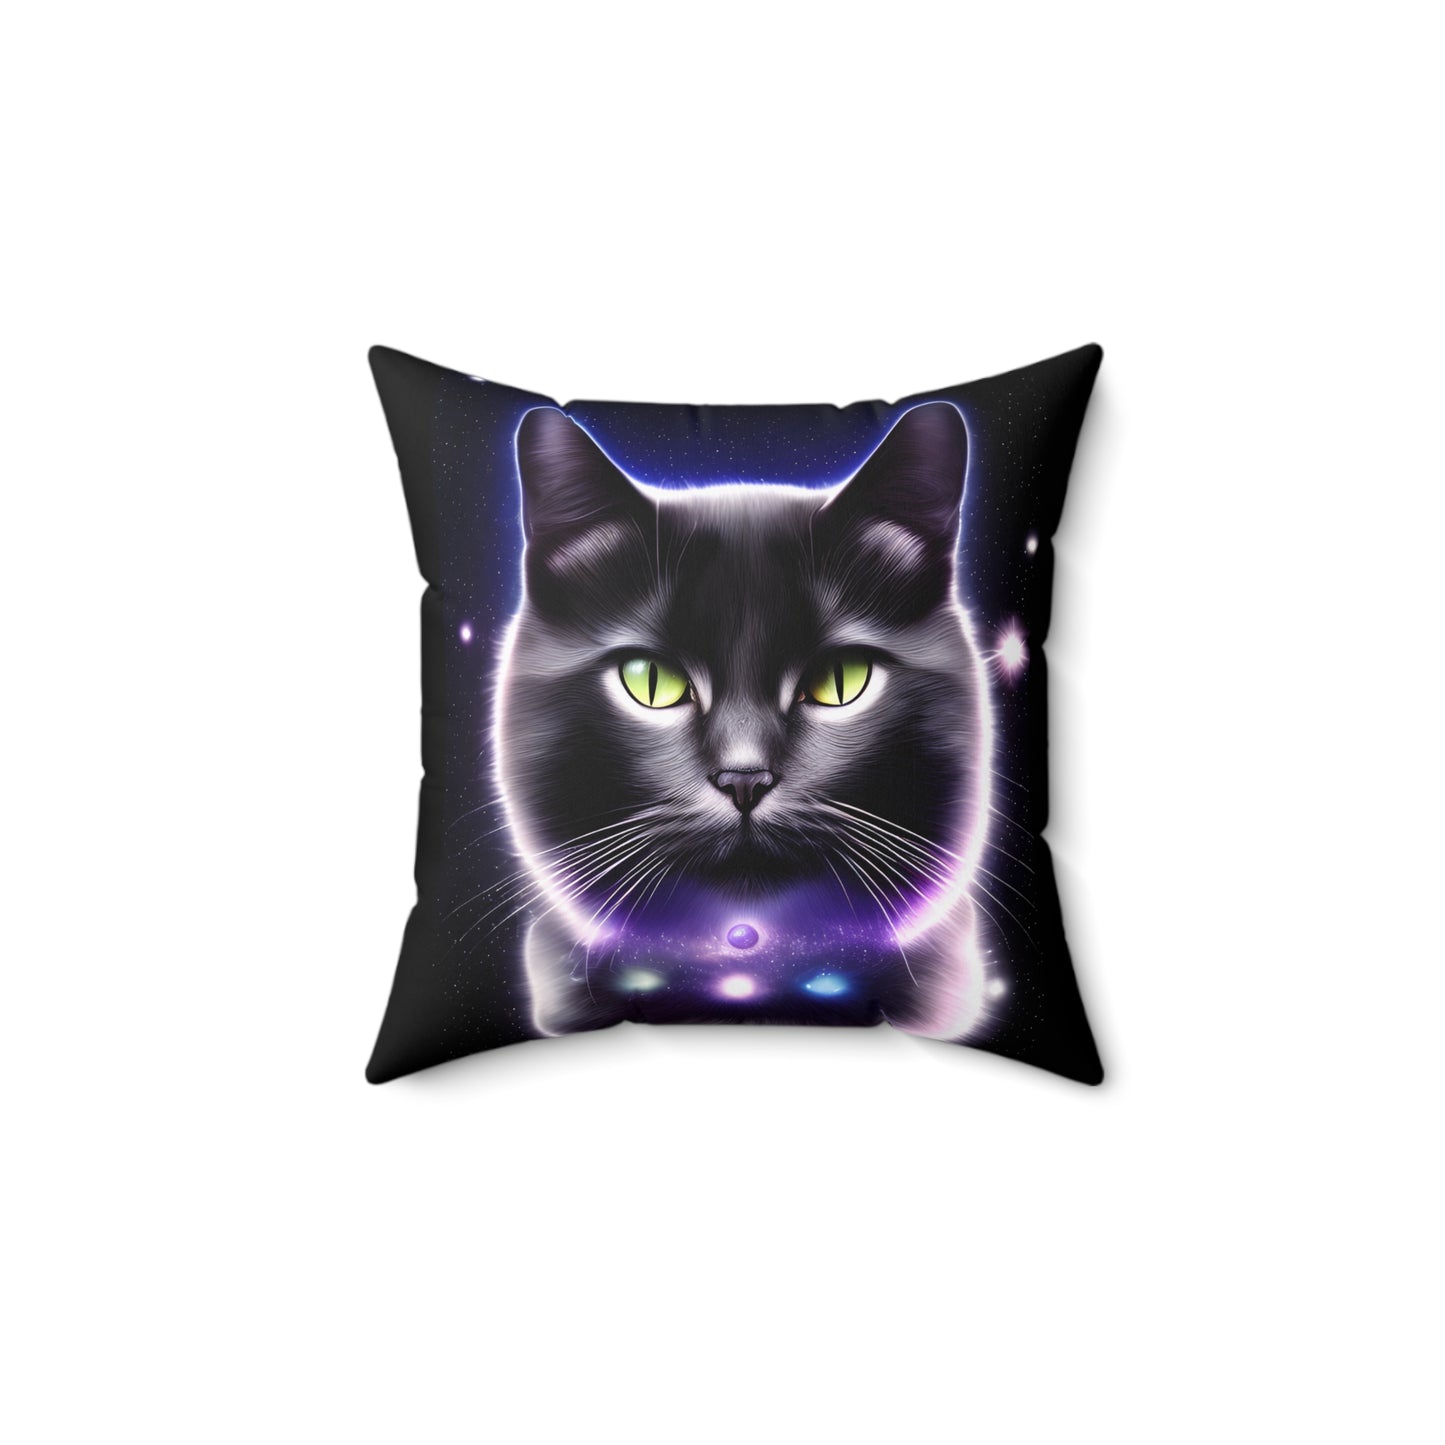 Couch Pillows - Celestial Cat Spun Polyester Square Pillow, Beautiful Indoor Pillows comes in Varying Sizes, Concealed Zipper